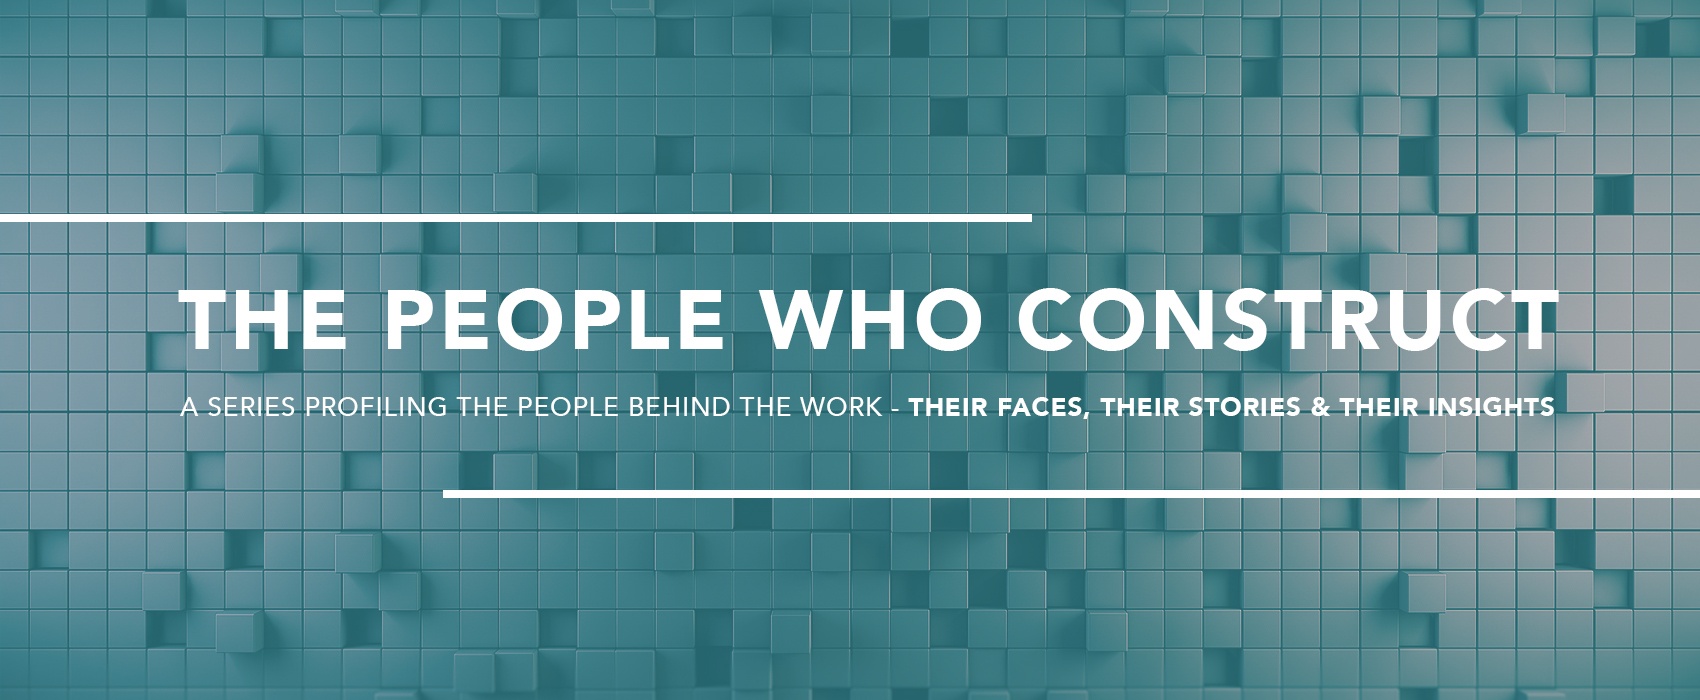 The People Who Construct